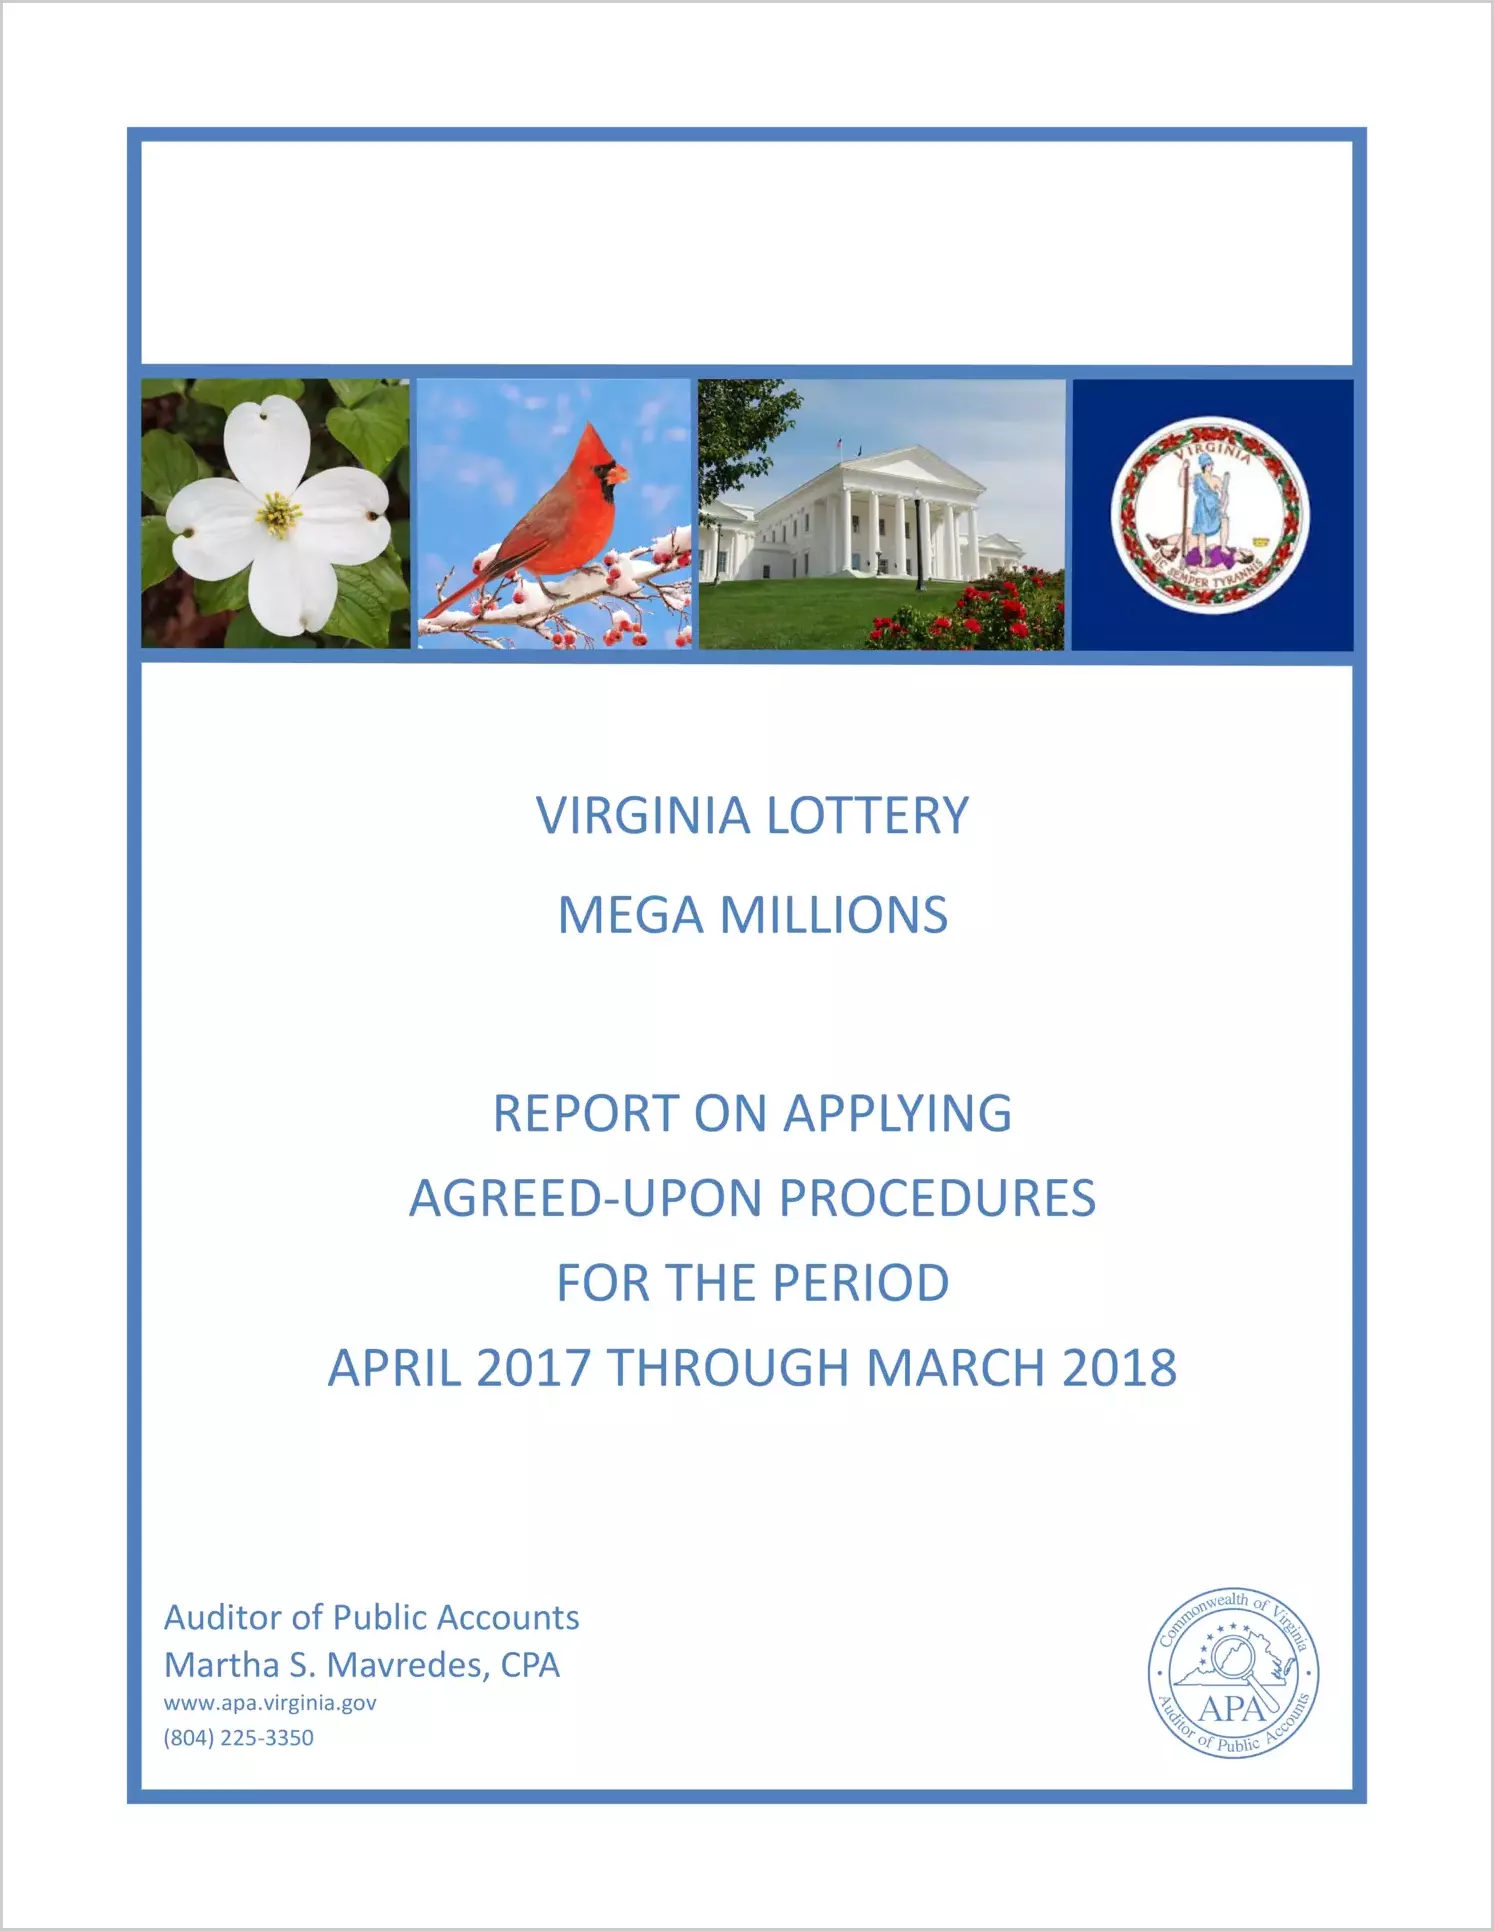 VA Lottery Mega Millions report on Applying Agreed-Upon Procedures for the period April 2017 through March 2018